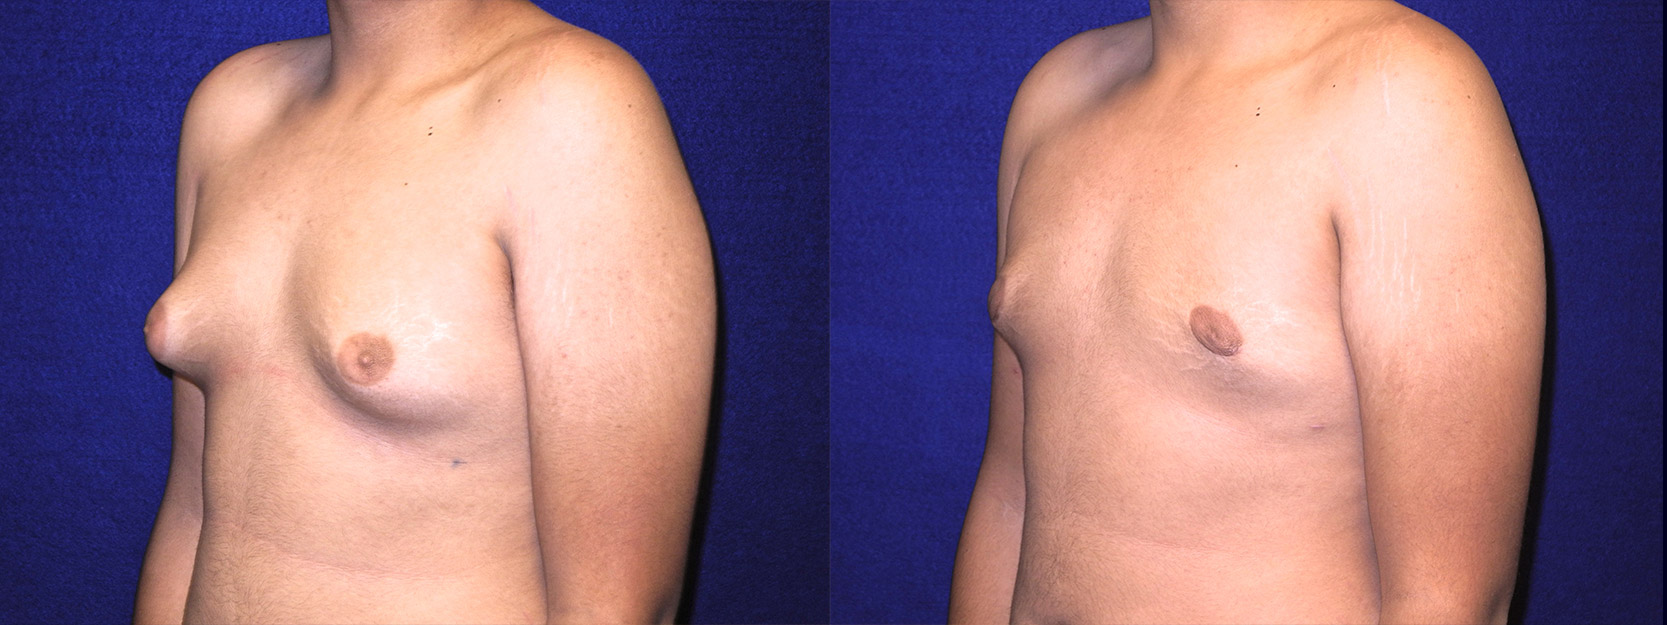 Left 3/4 View - Male Breast Reduction